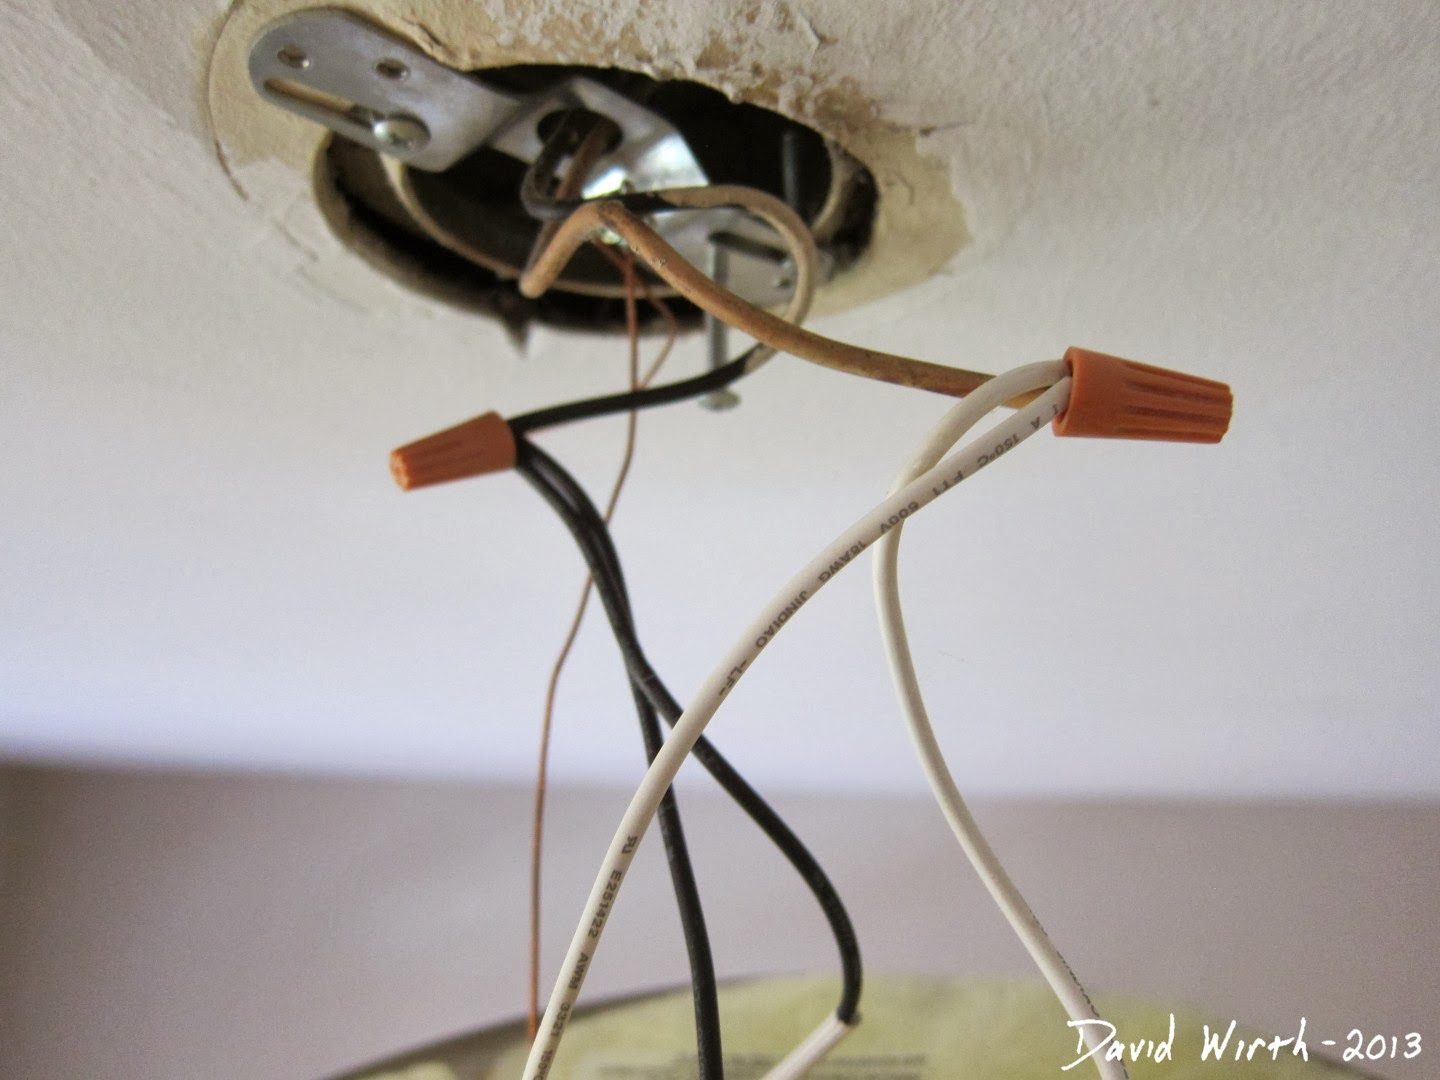 What Wires Go to What When Hooking Up a Light Fixture